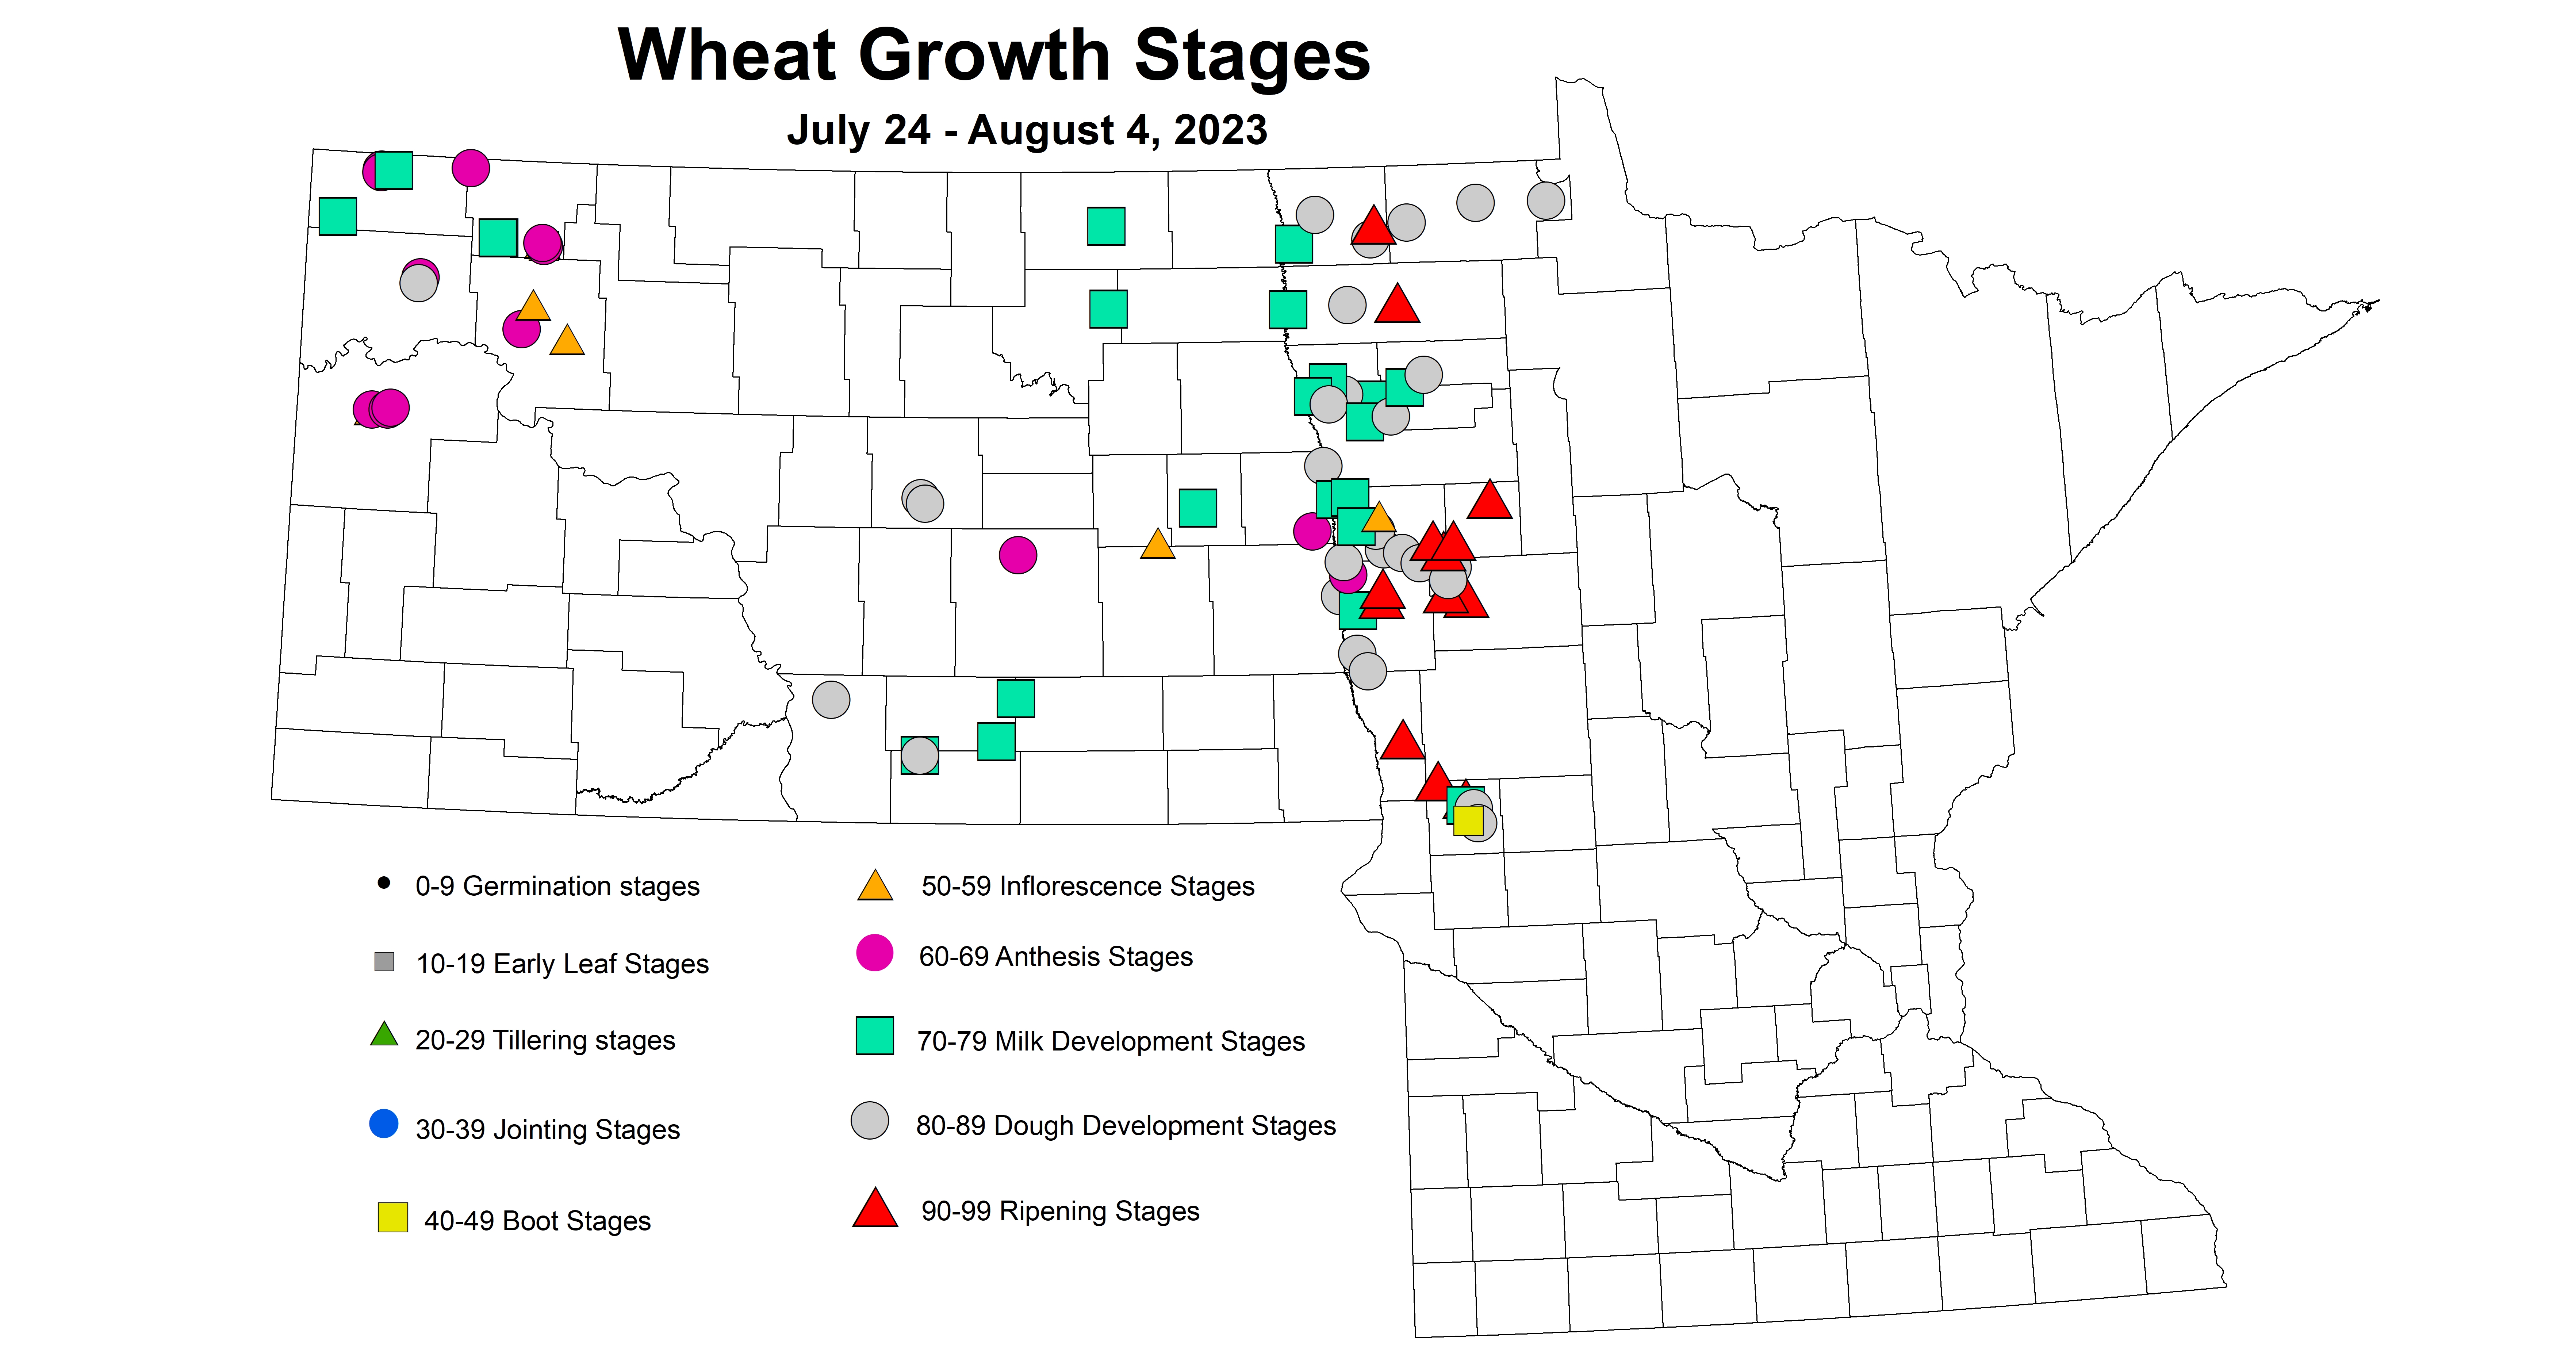 wheat growth stages 7.24-8.4 2023